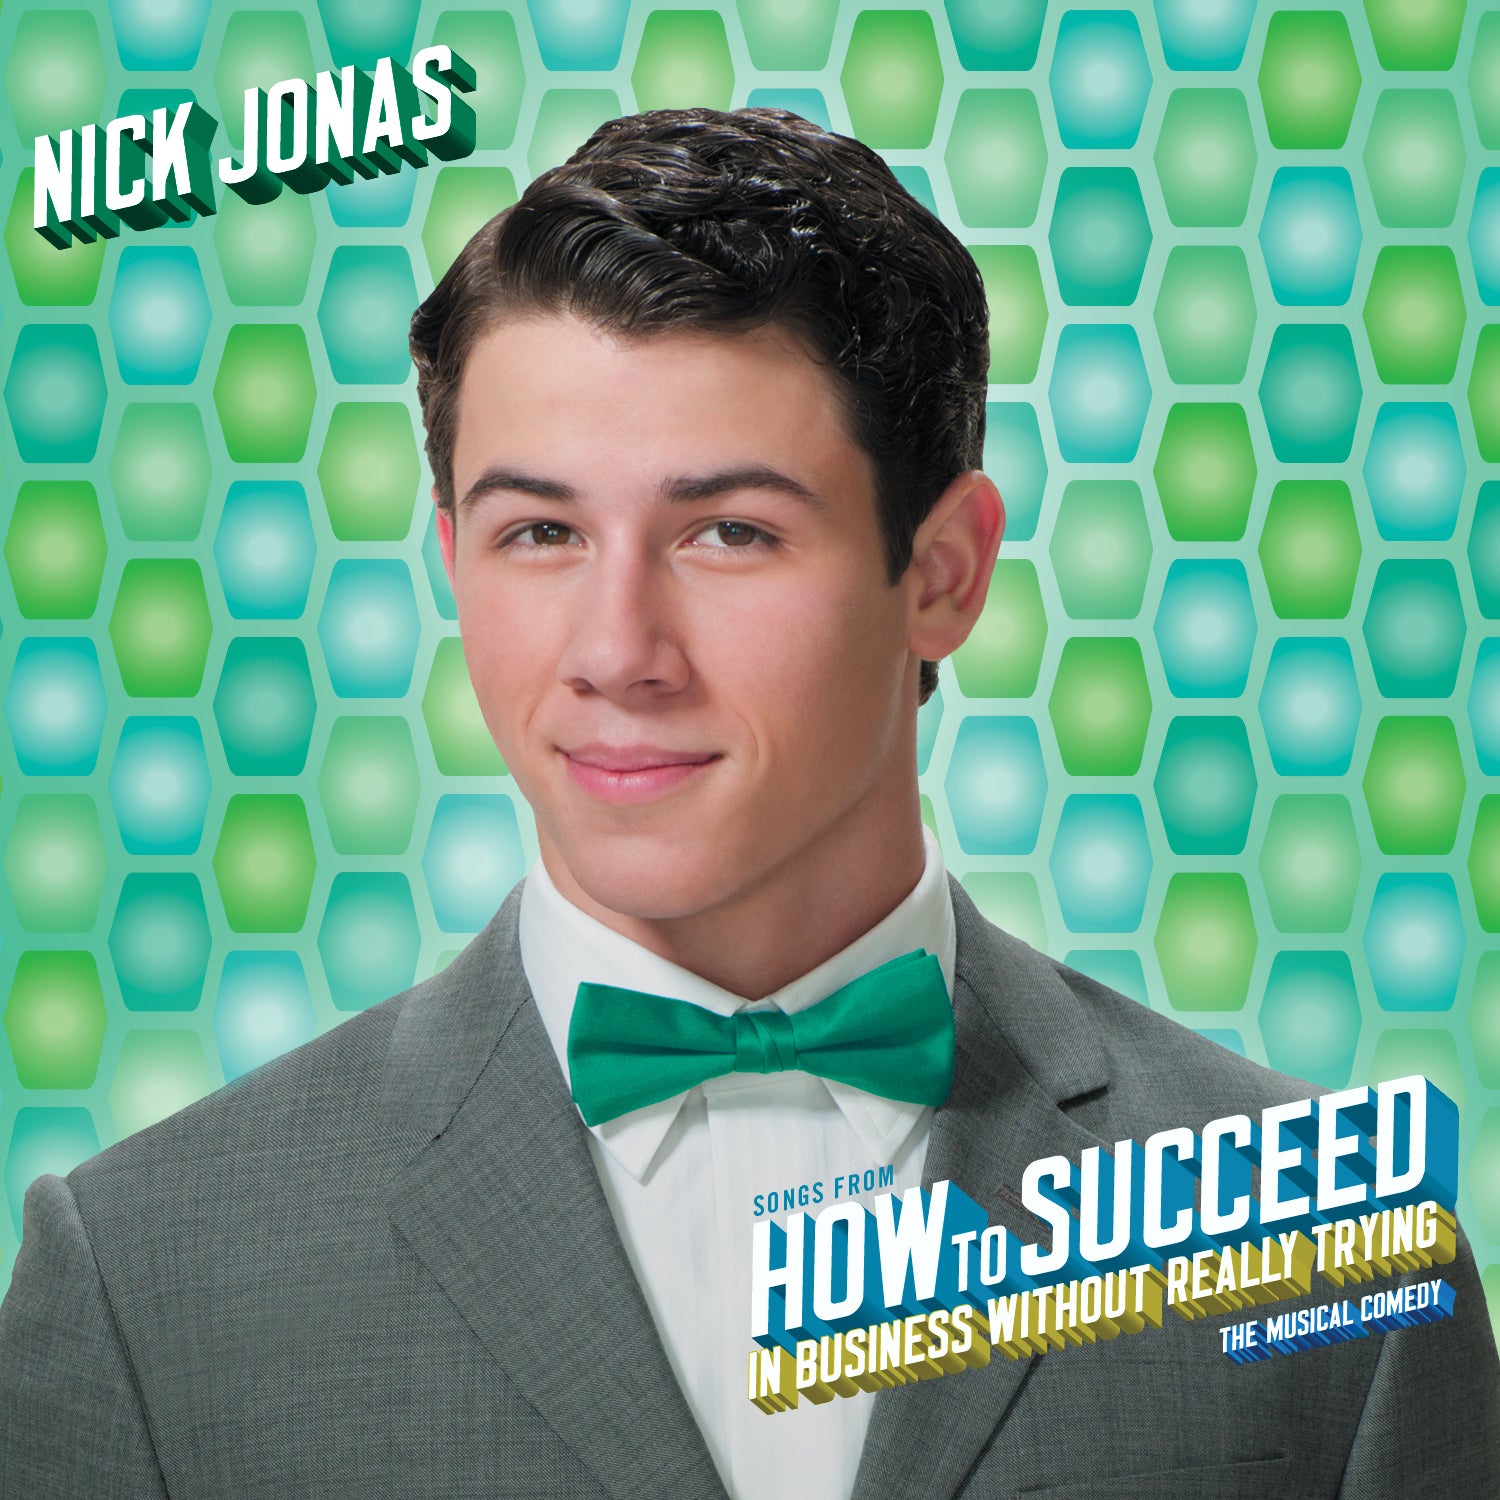 Nick Jonas: Songs From How To Succeed In Business Without Really Trying [MP3]